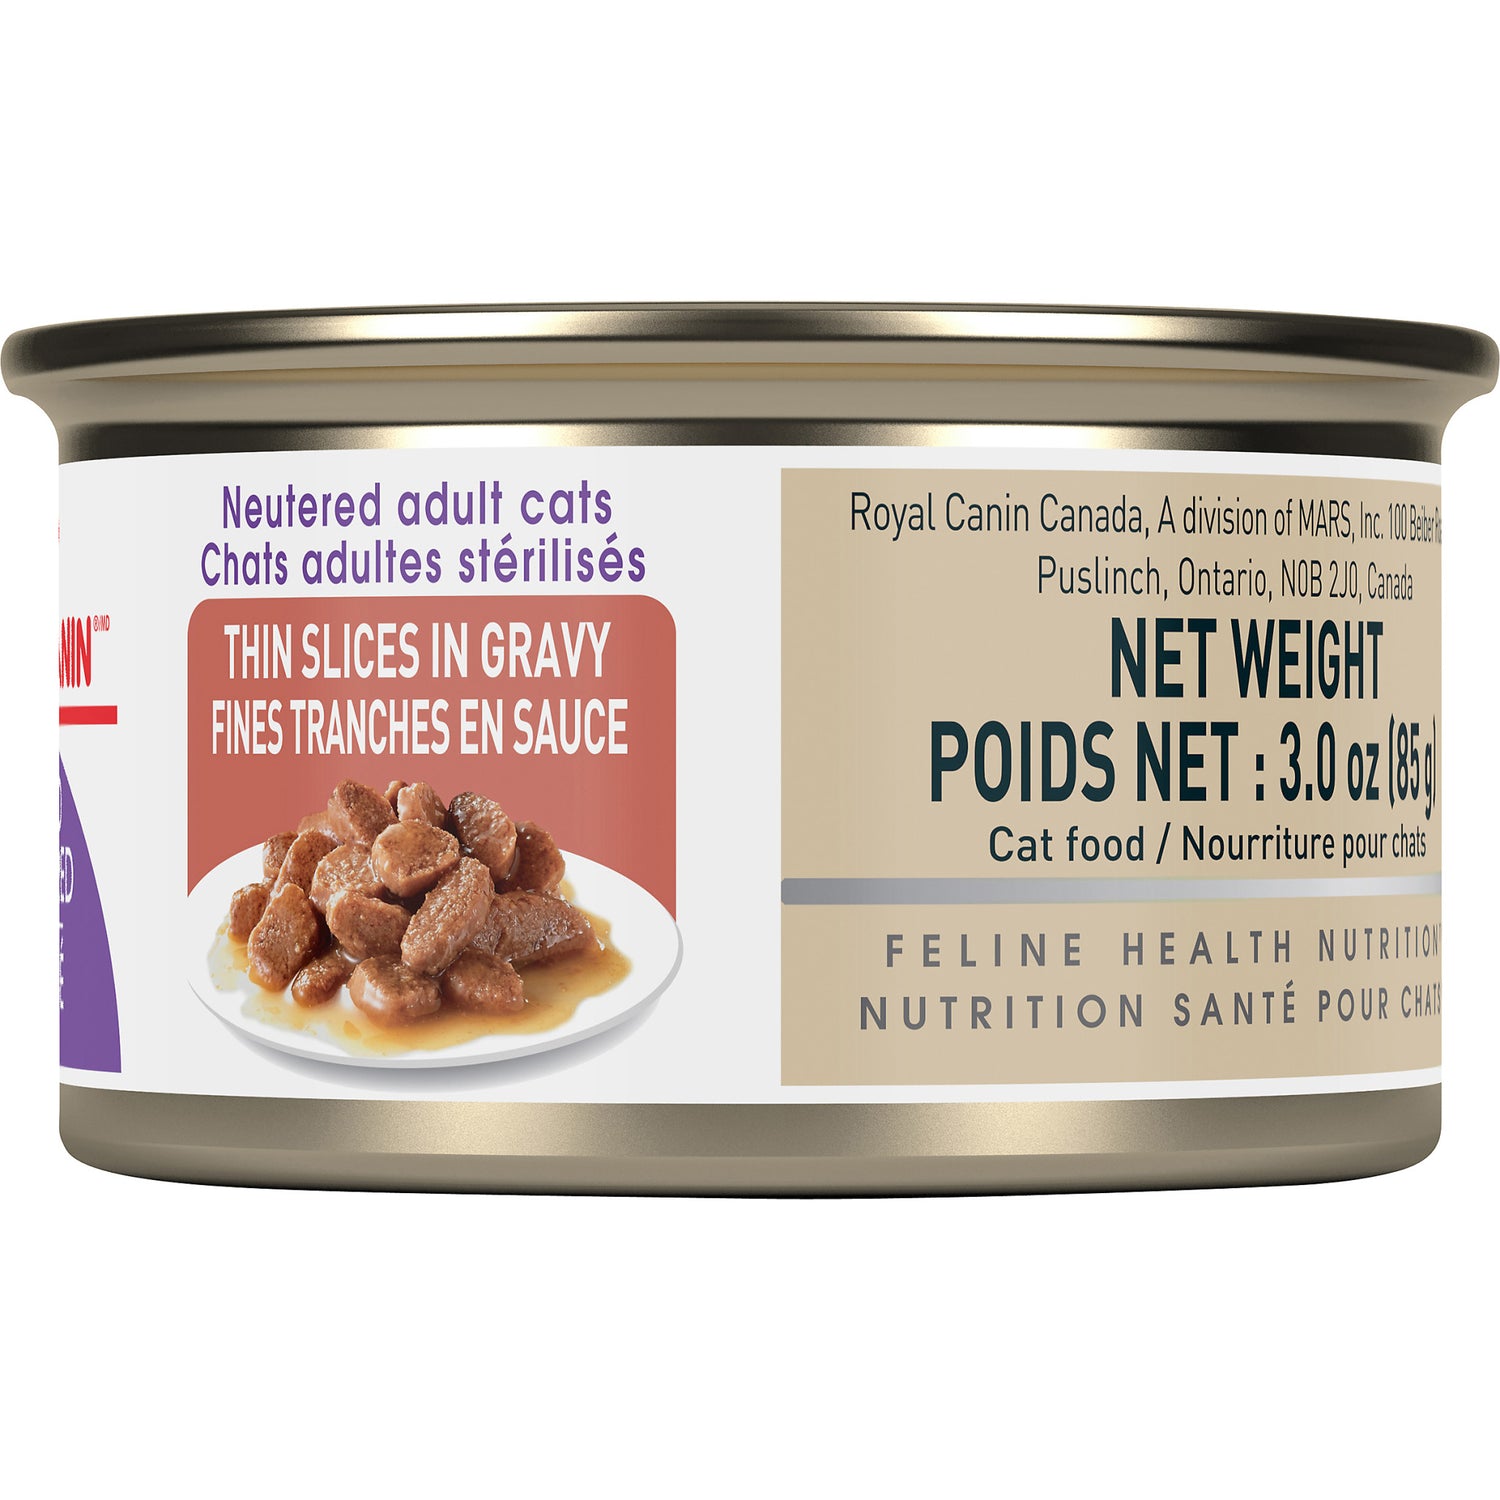 Royal Canin® Feline Health Nutrition™ Spayed/Neutered Thin Slices In Gravy Canned Cat Food